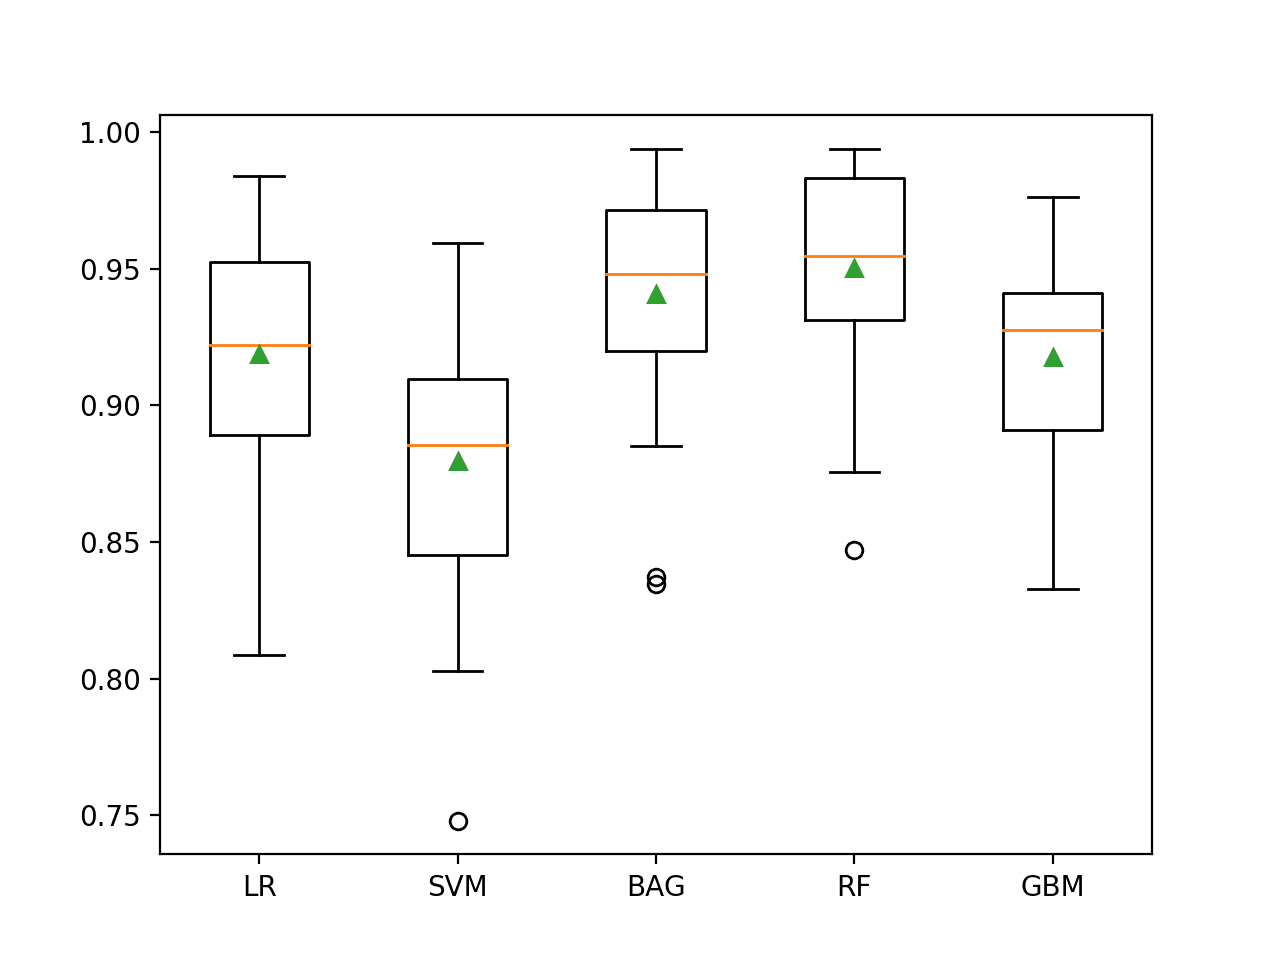 Box and Whisker Plot of Machine Learning Models on the Imbalanced Mammography Dataset